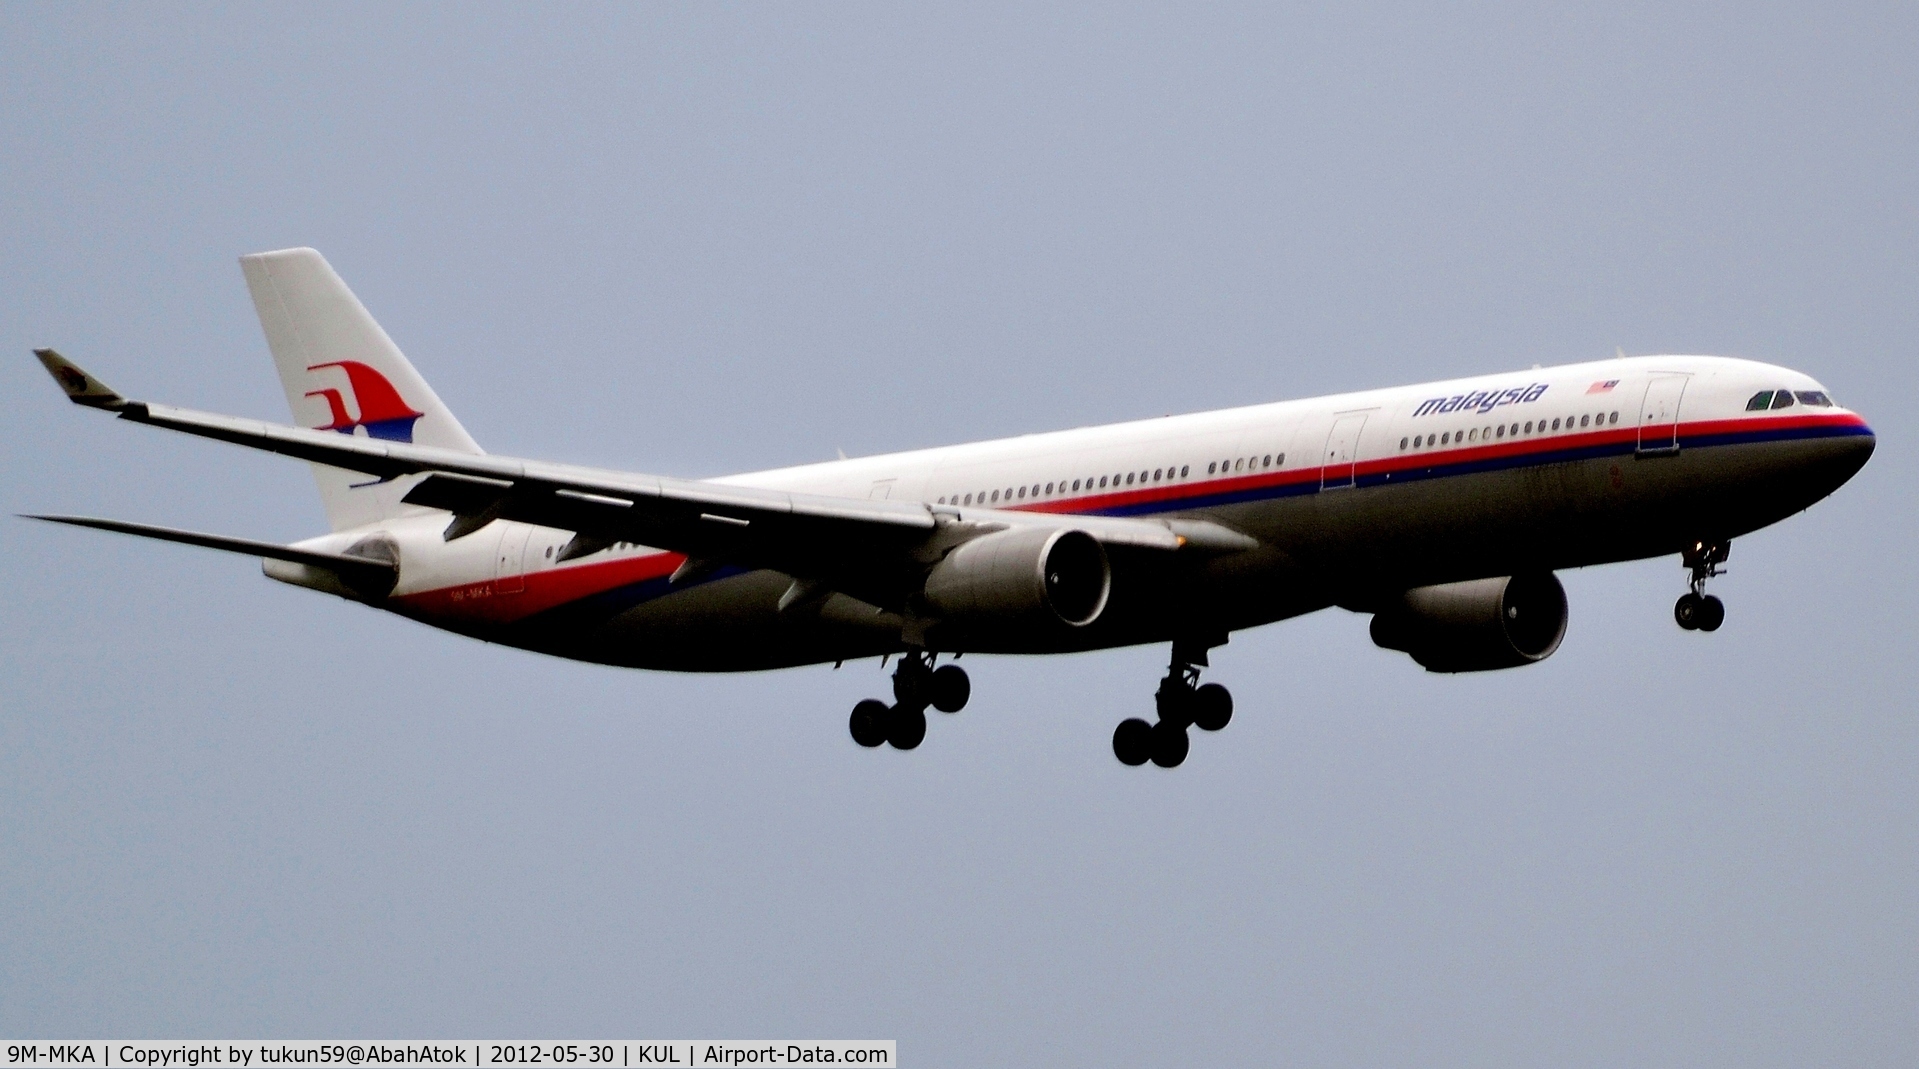 9M-MKA, 1995 Airbus A330-322 C/N 067, Malaysia Airlines